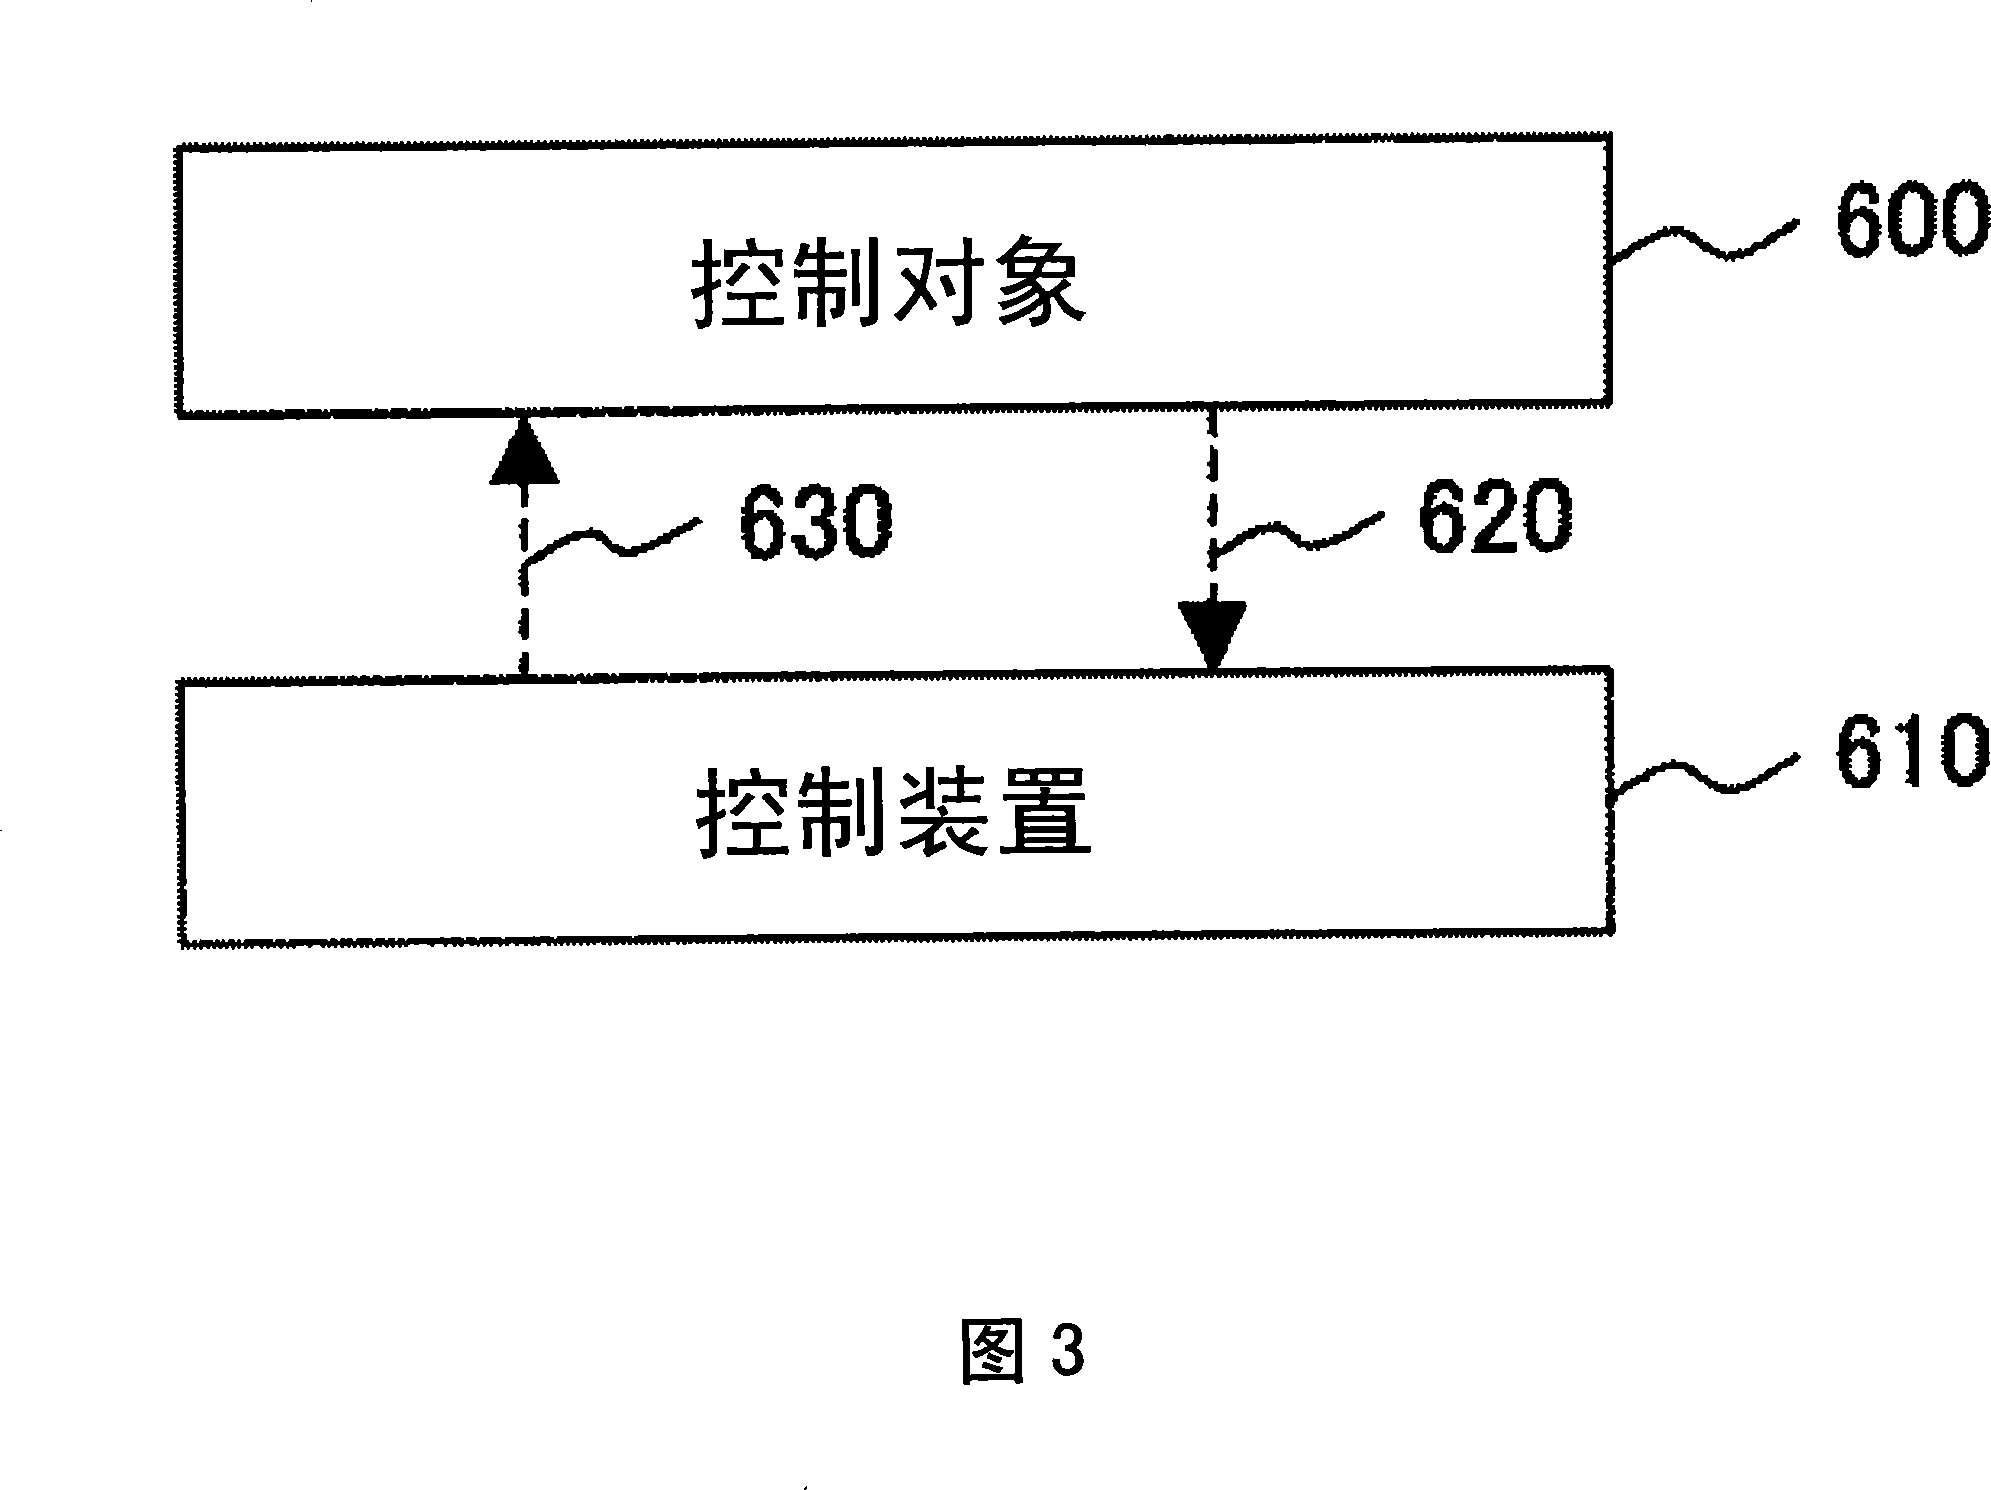 Control device for boiler equipment and gas concentration concluding apparatus